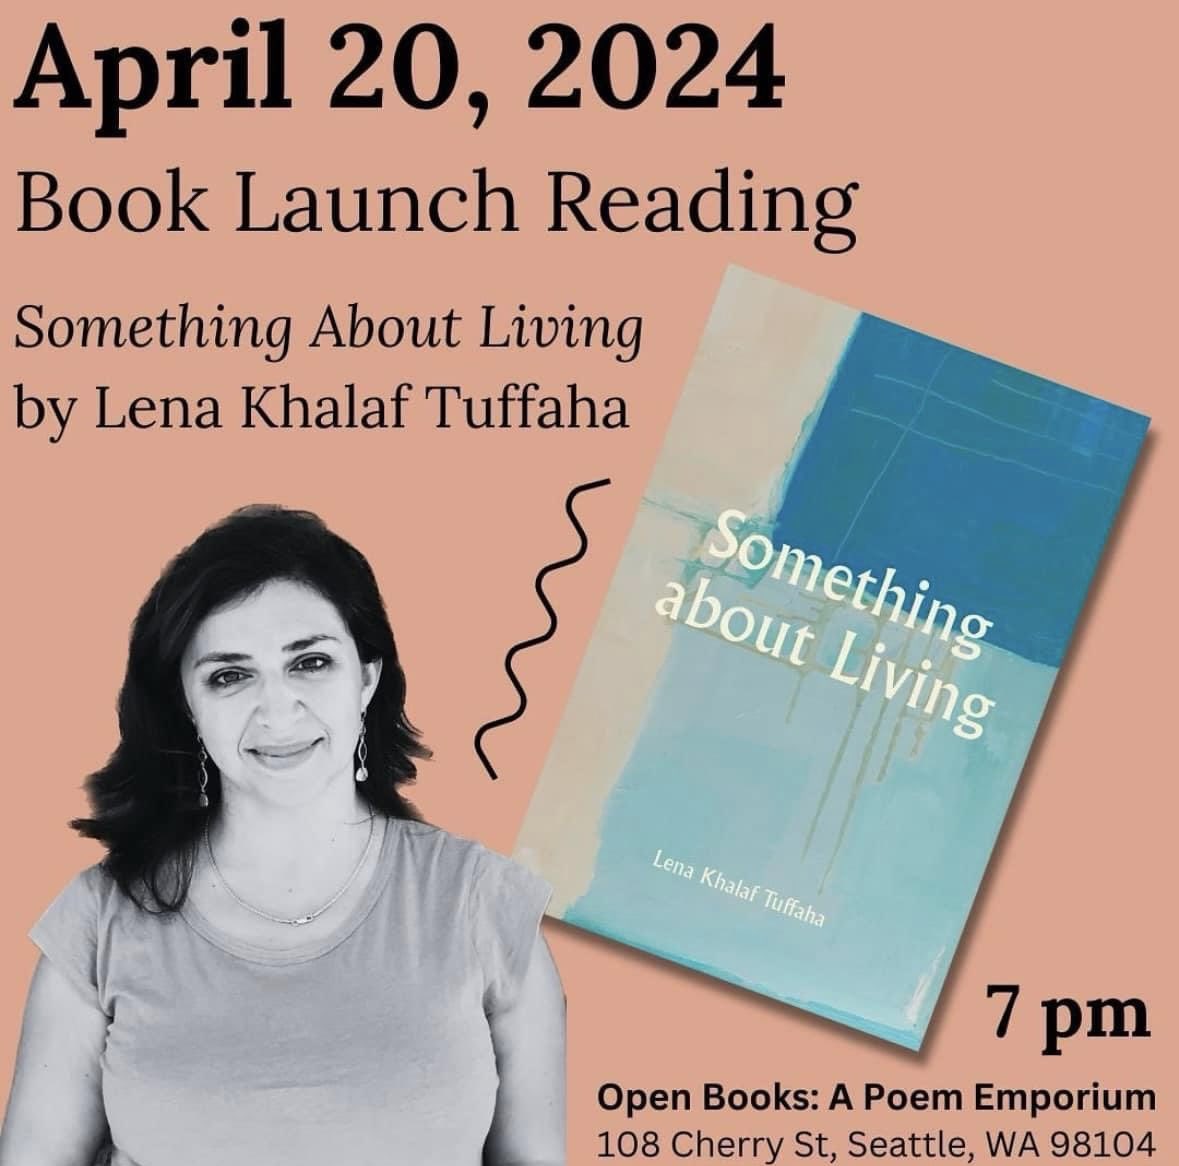 Just over a week until @LKTuffaha’s book launch for Something about Living at @openpoetrybooks on 4/20! Event info: …n-books-a-poem-emporium.myshopify.com/pages/4-20-boo… #booklaunch #poetry #poetrycommunity #palestinianpoet #writer #womenauthors #diaspora #landscape #belonging #poet